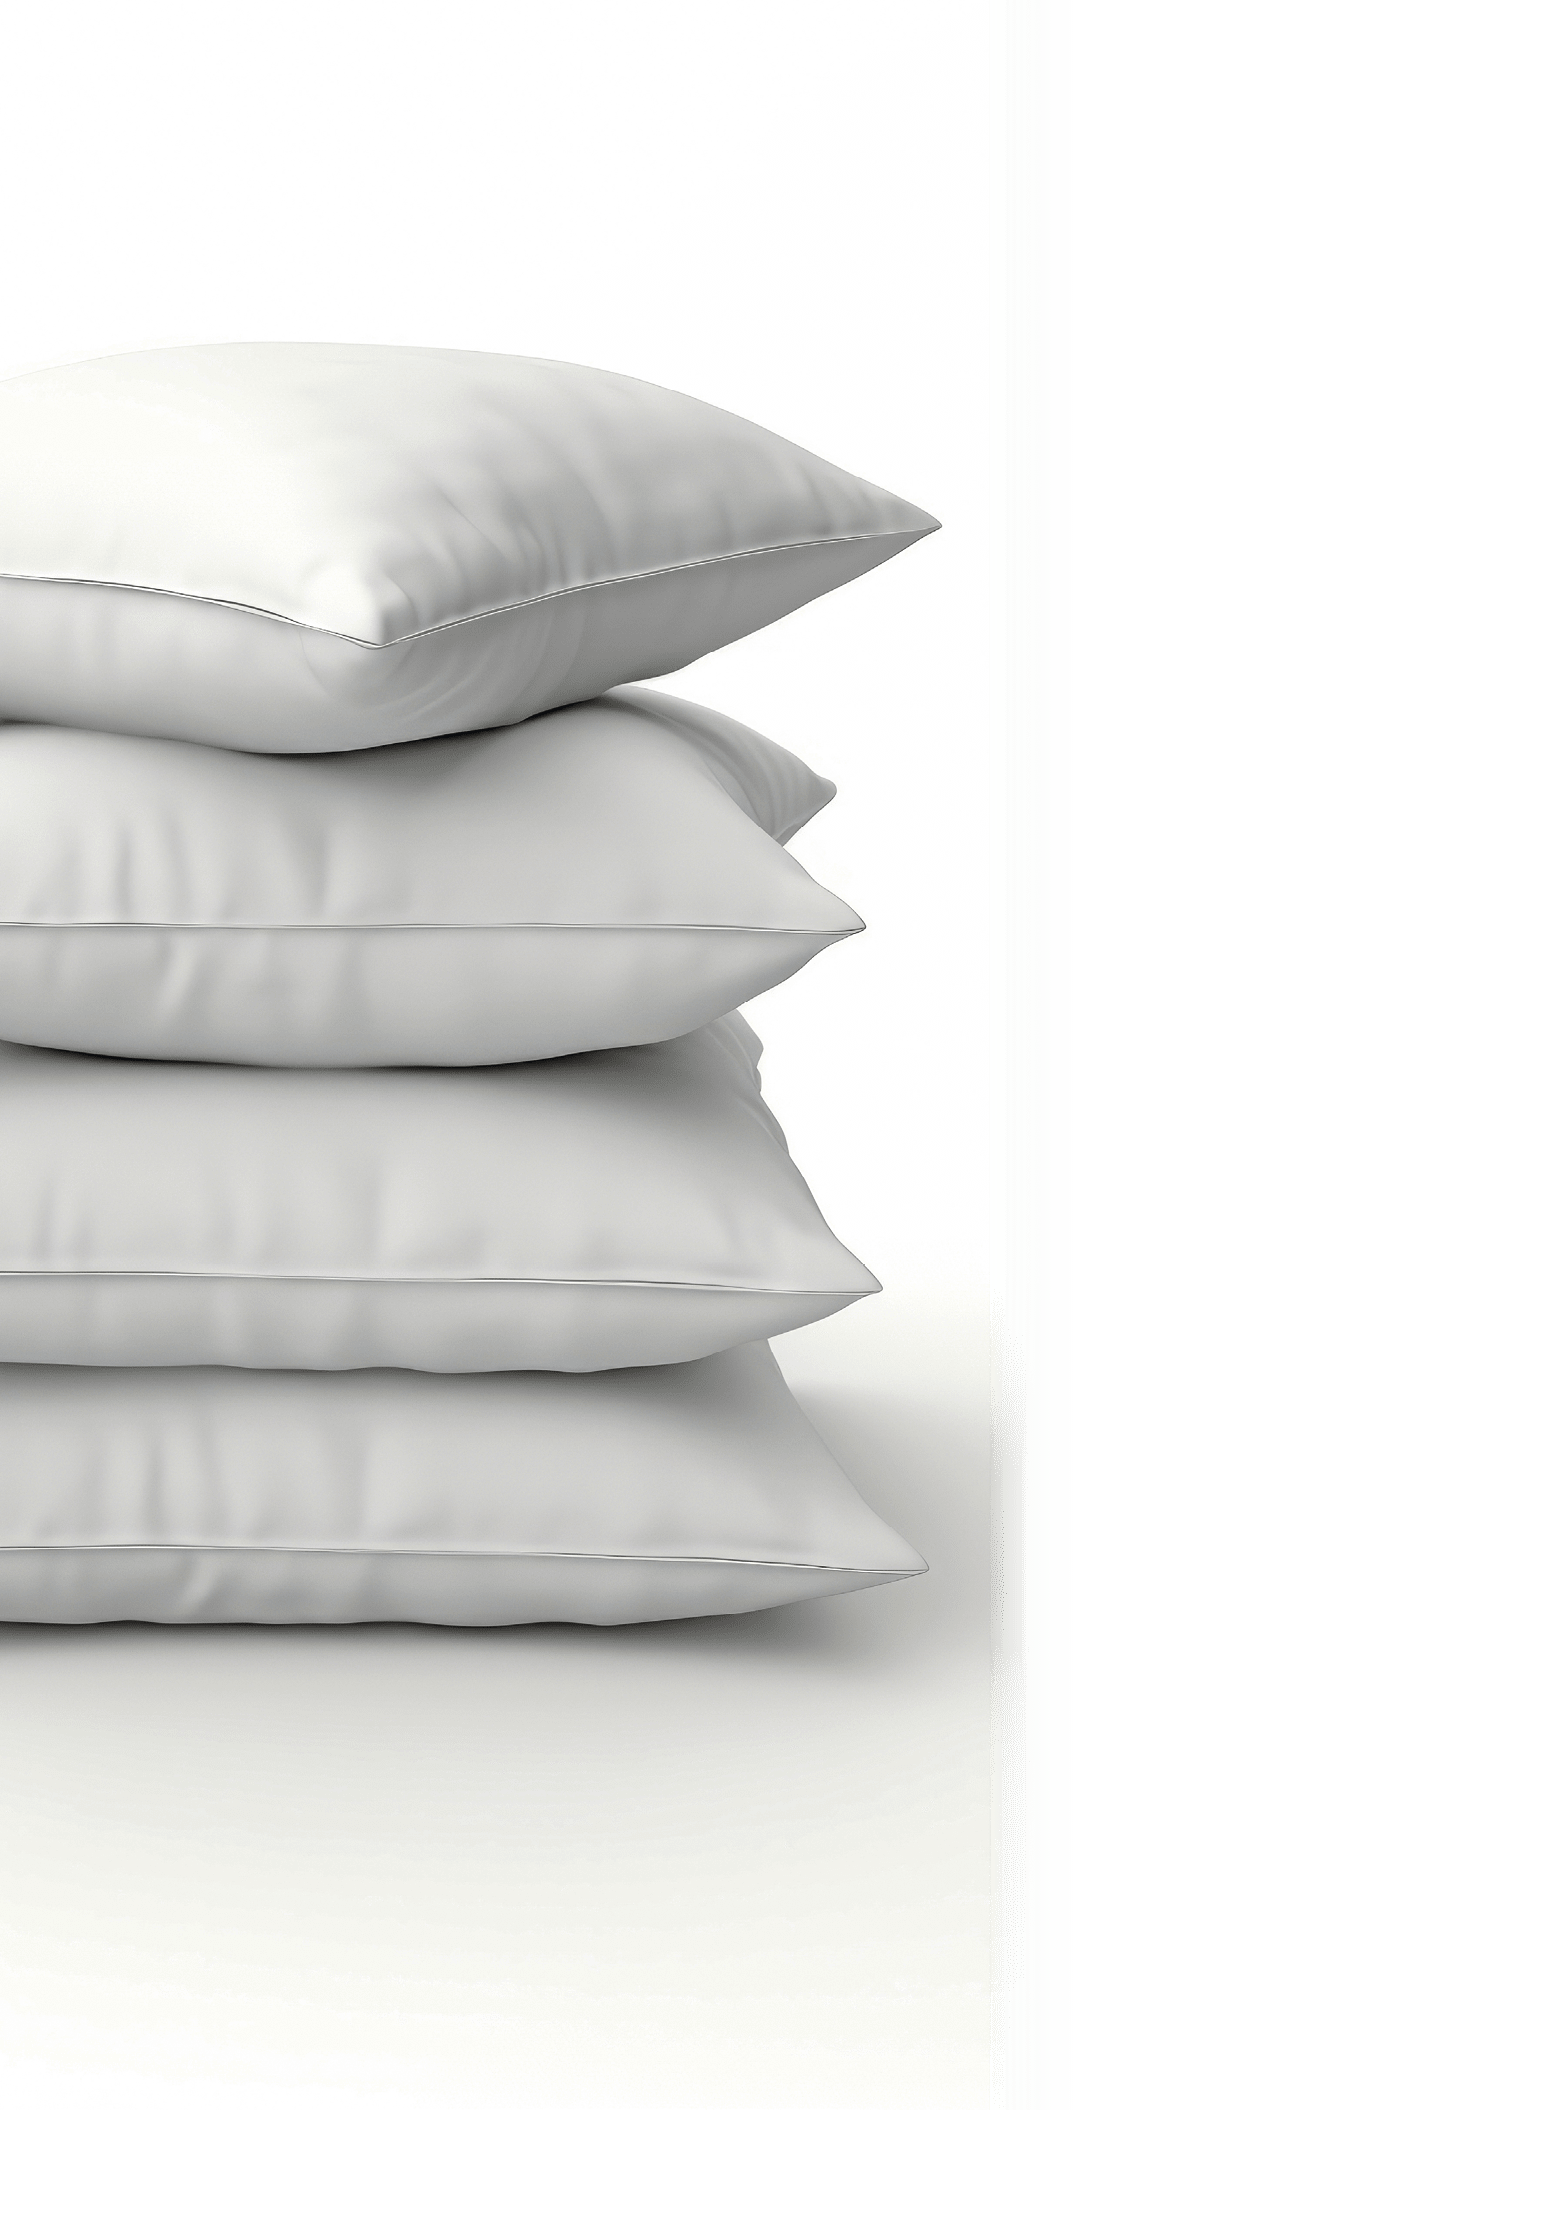 Stack of pillows on white background.